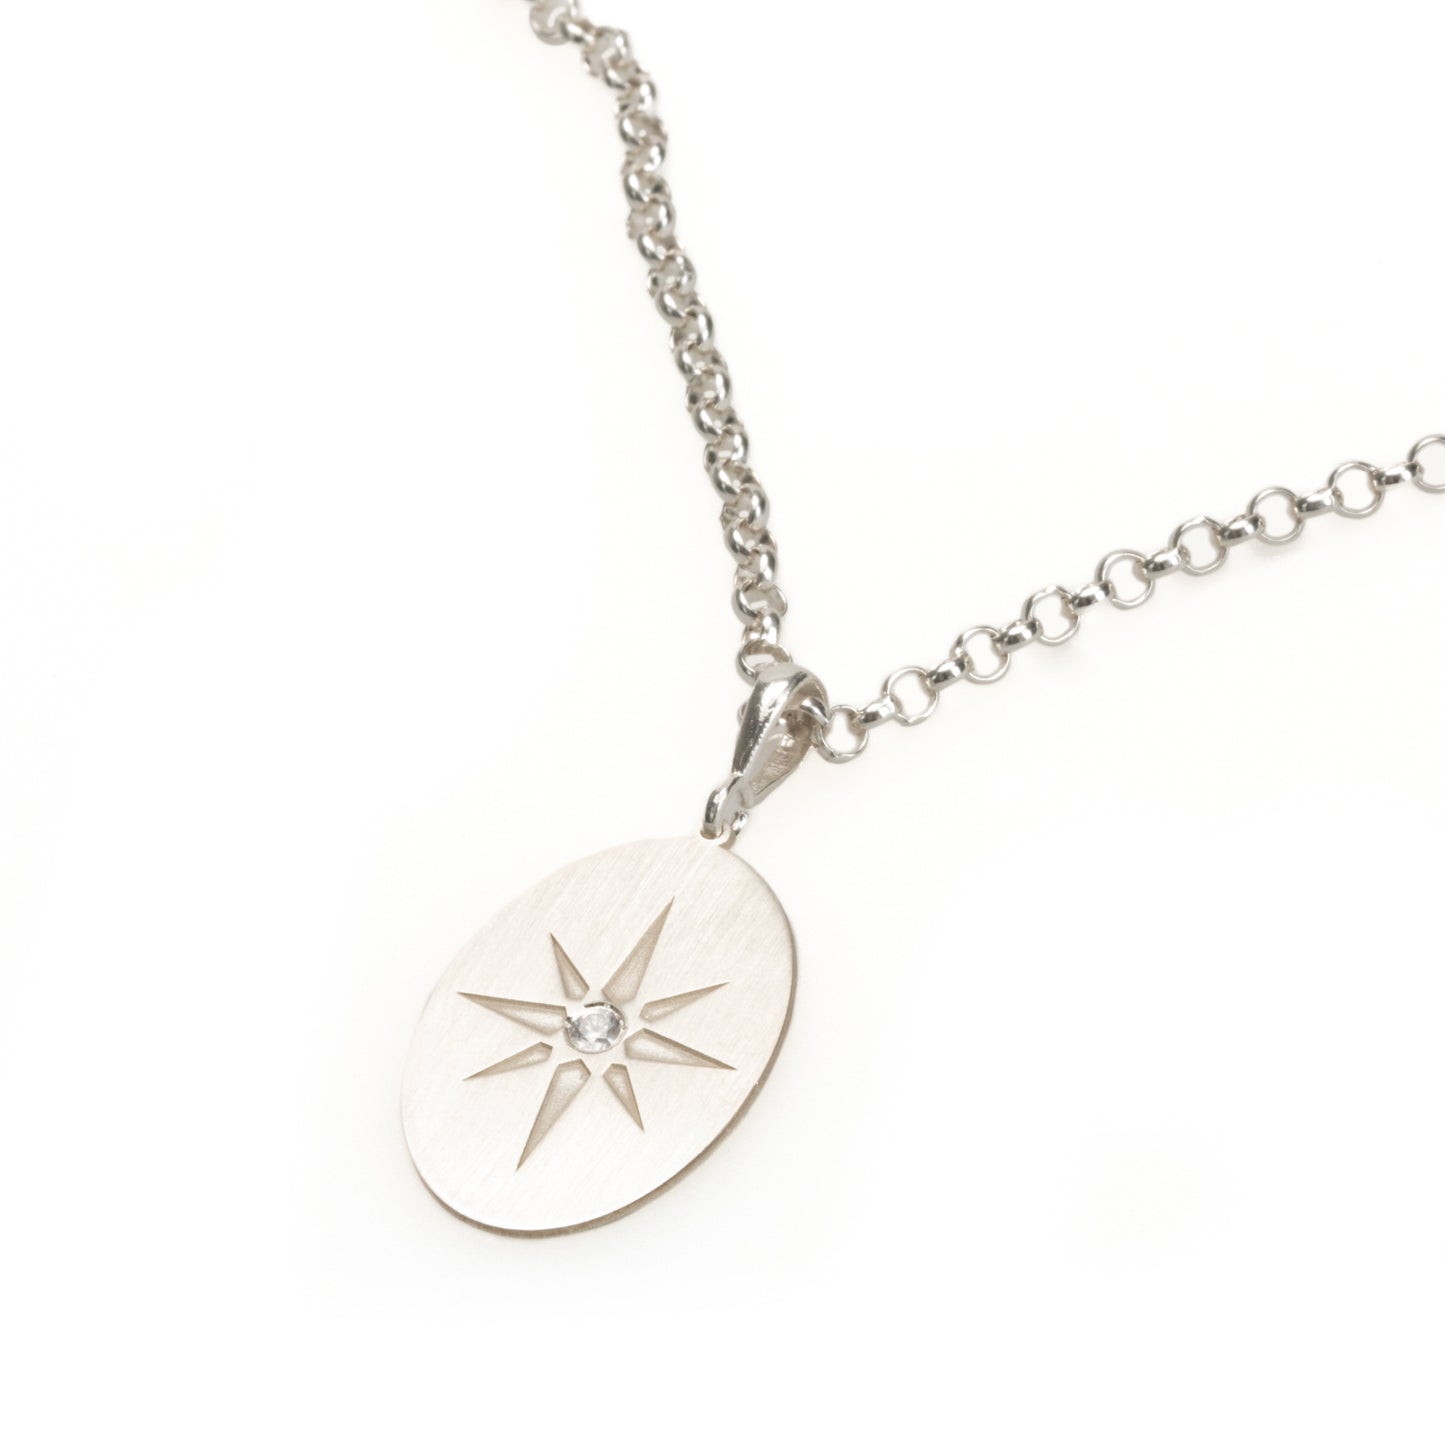 North Star Pendant Charm Necklace